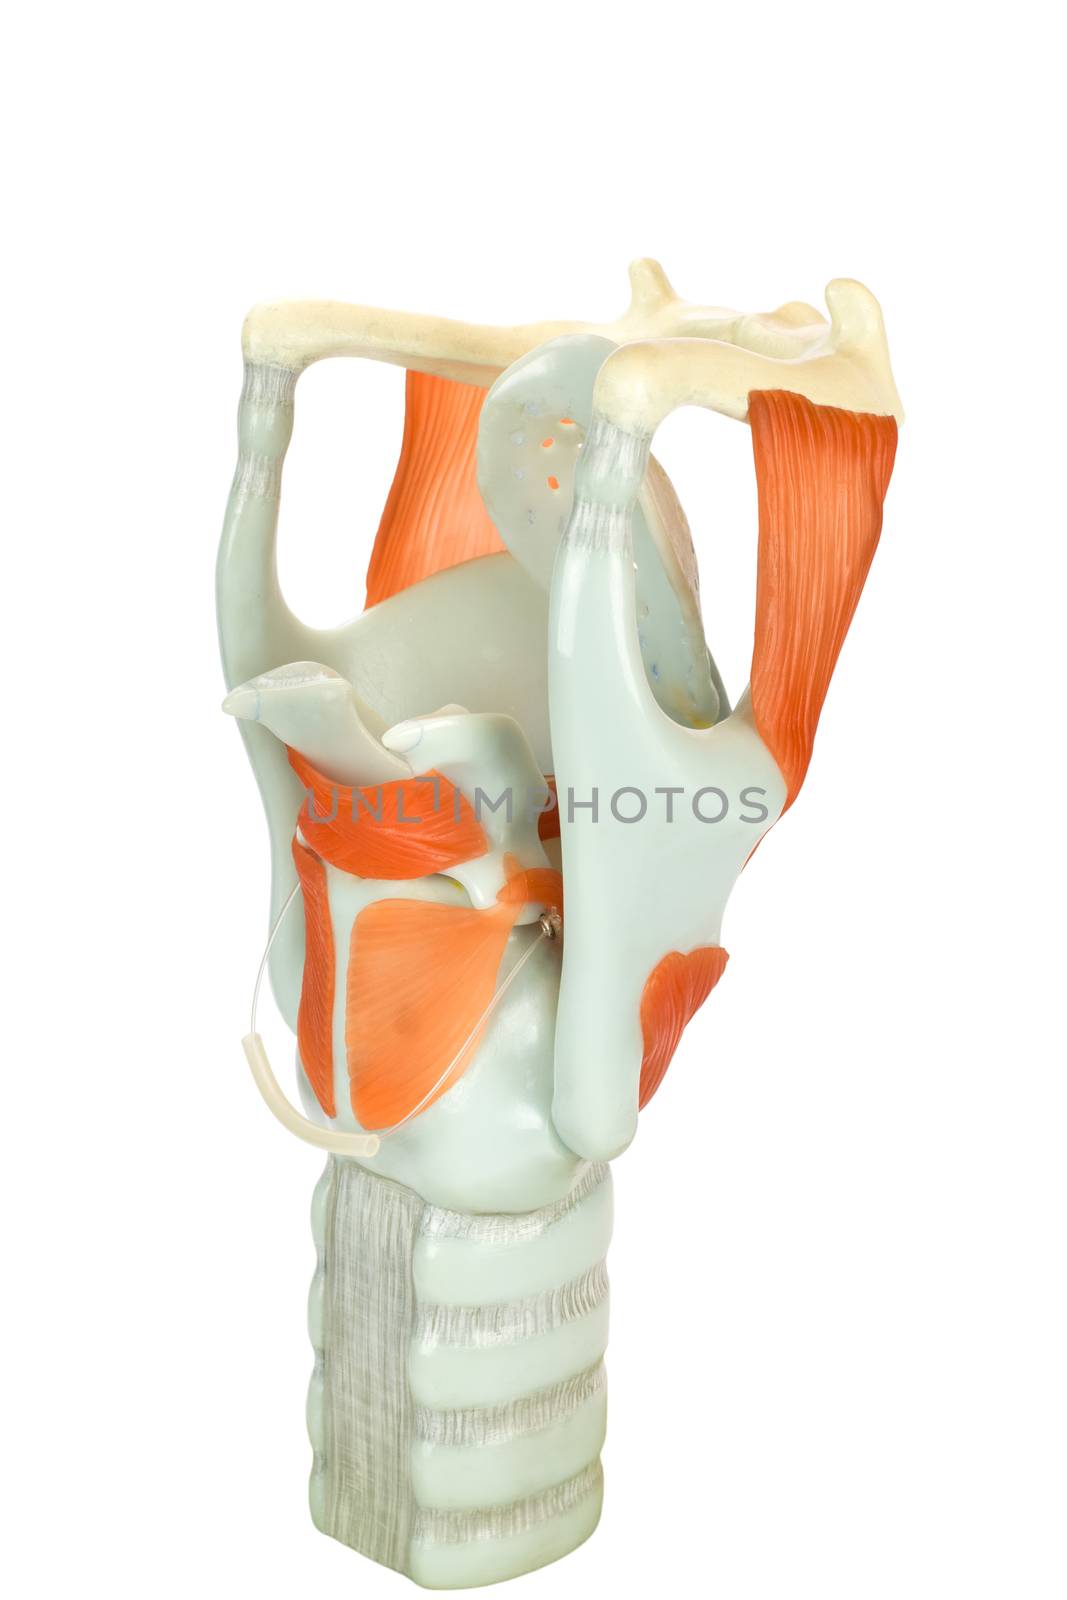 Model of human larynx or voice box isolated on white background